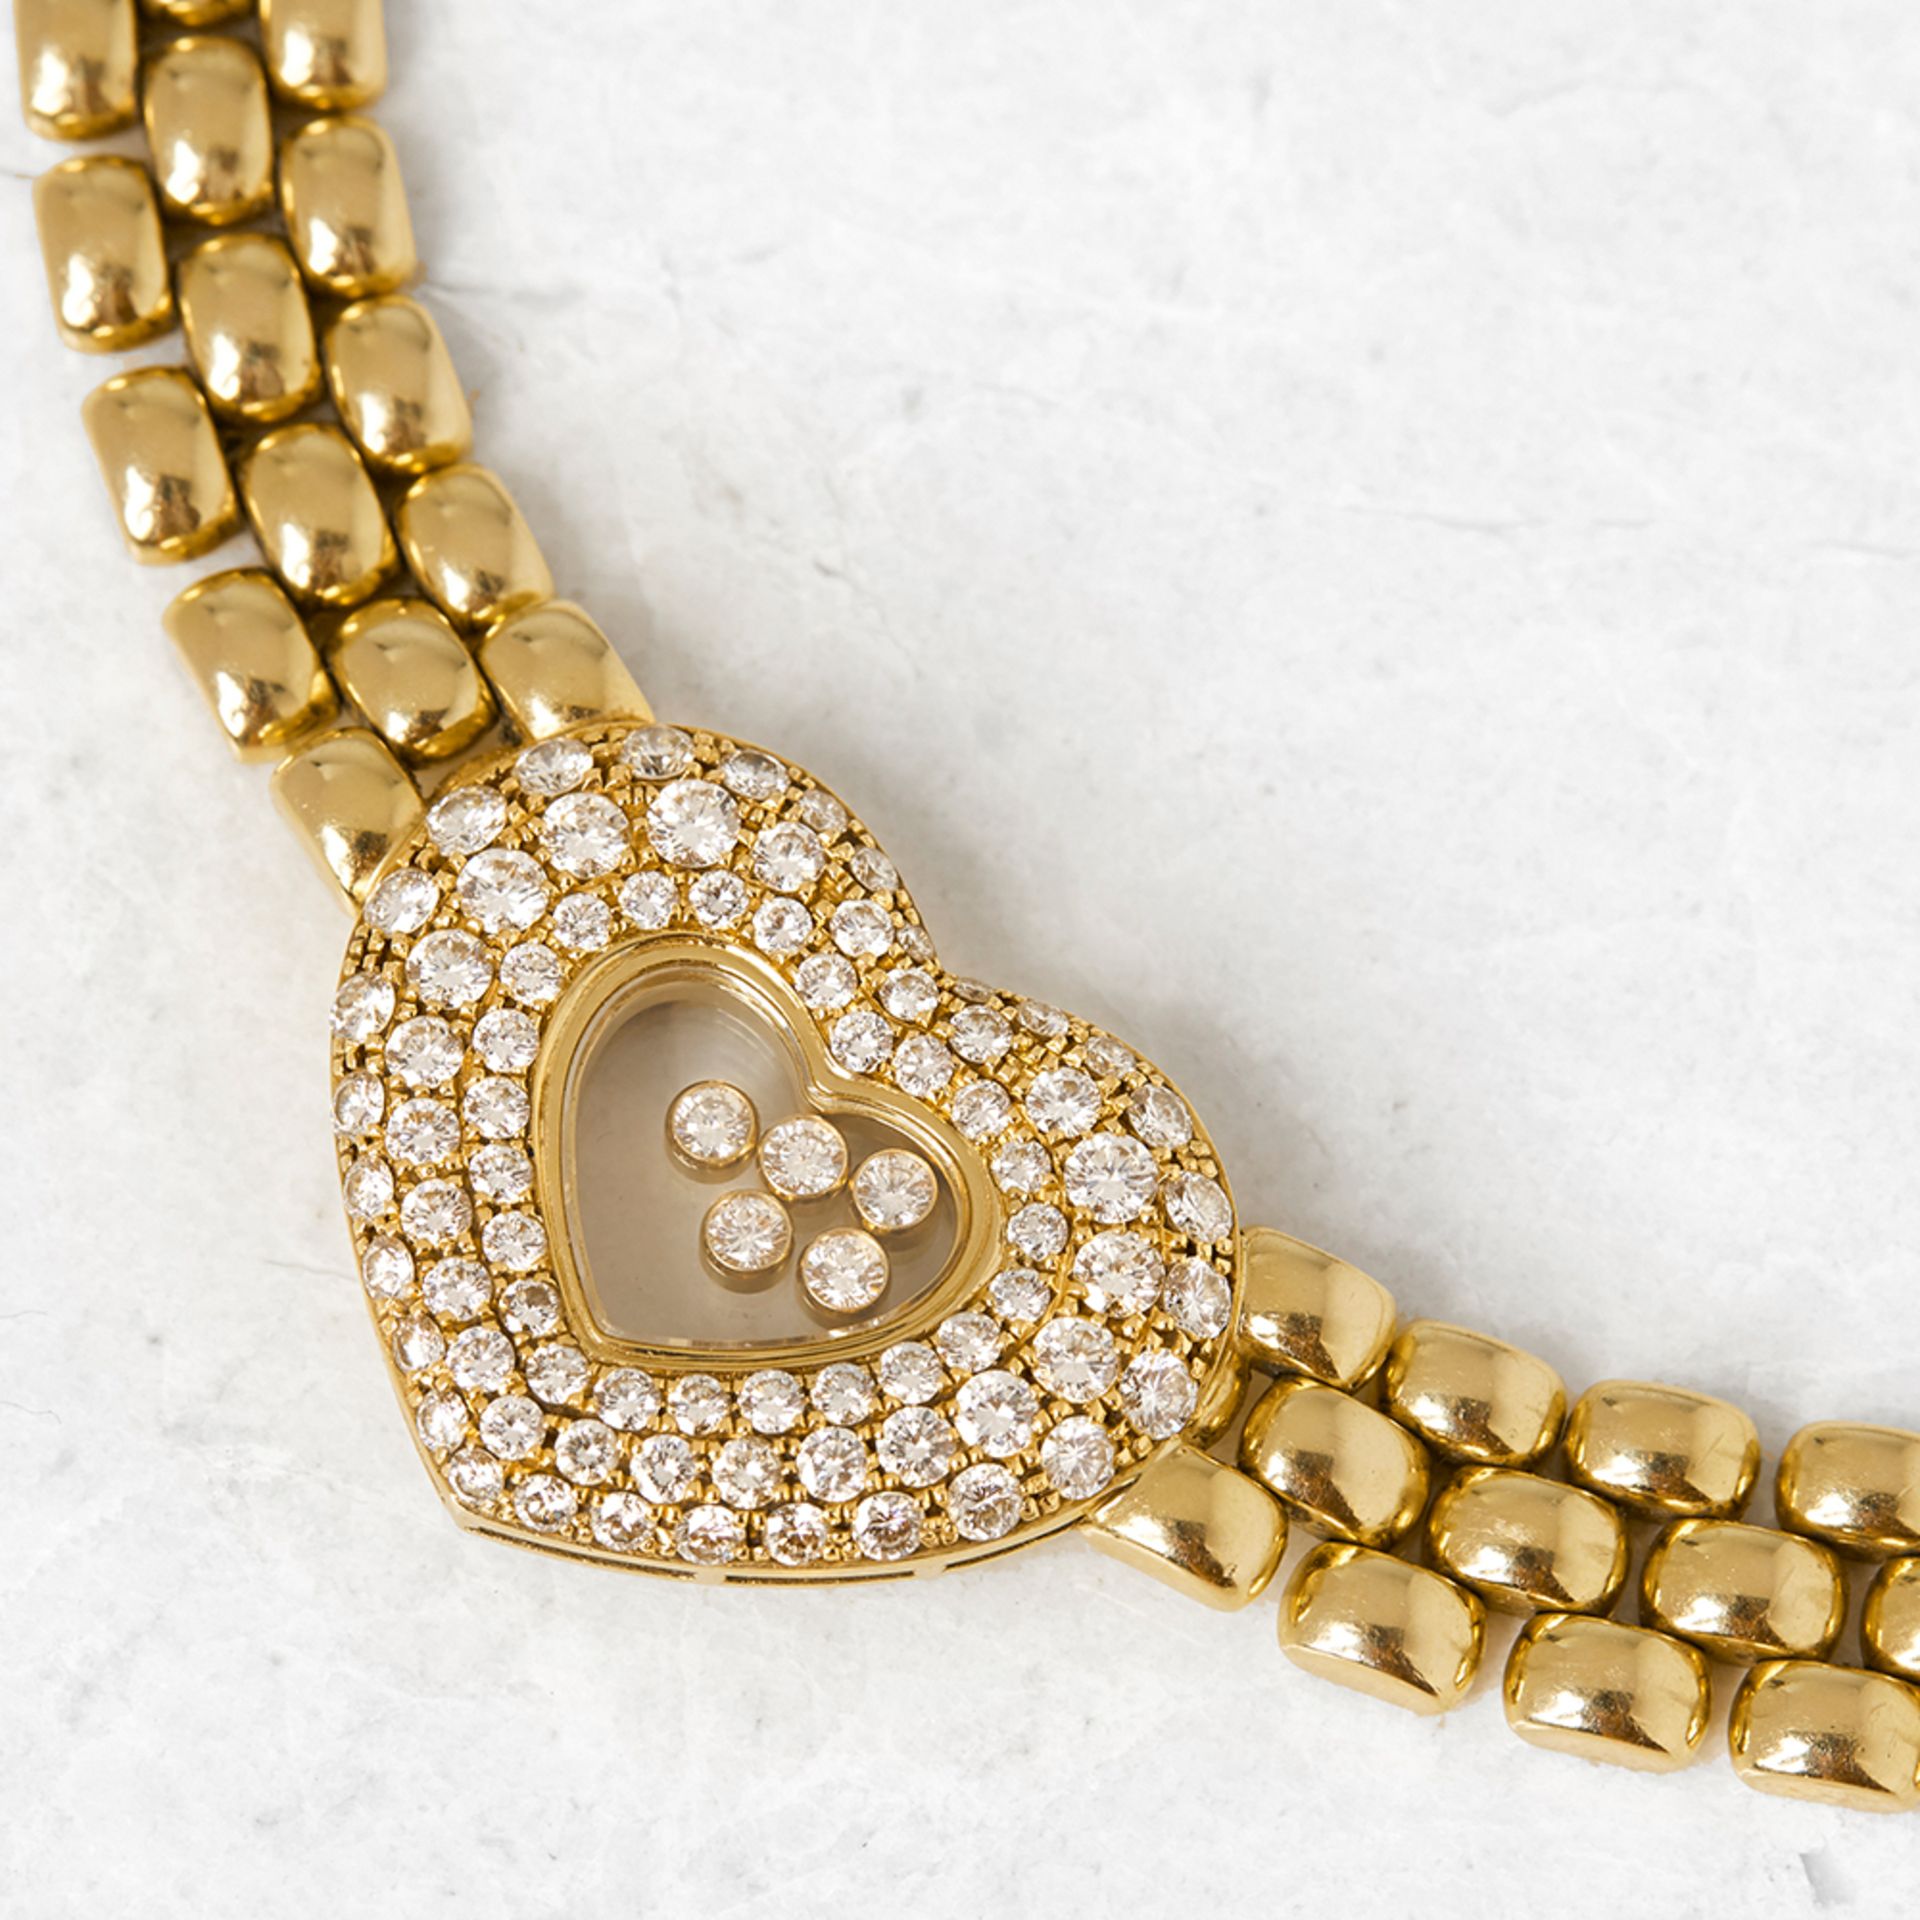 Chopard 18k Yellow Gold Happy Diamonds Necklace - Image 2 of 7